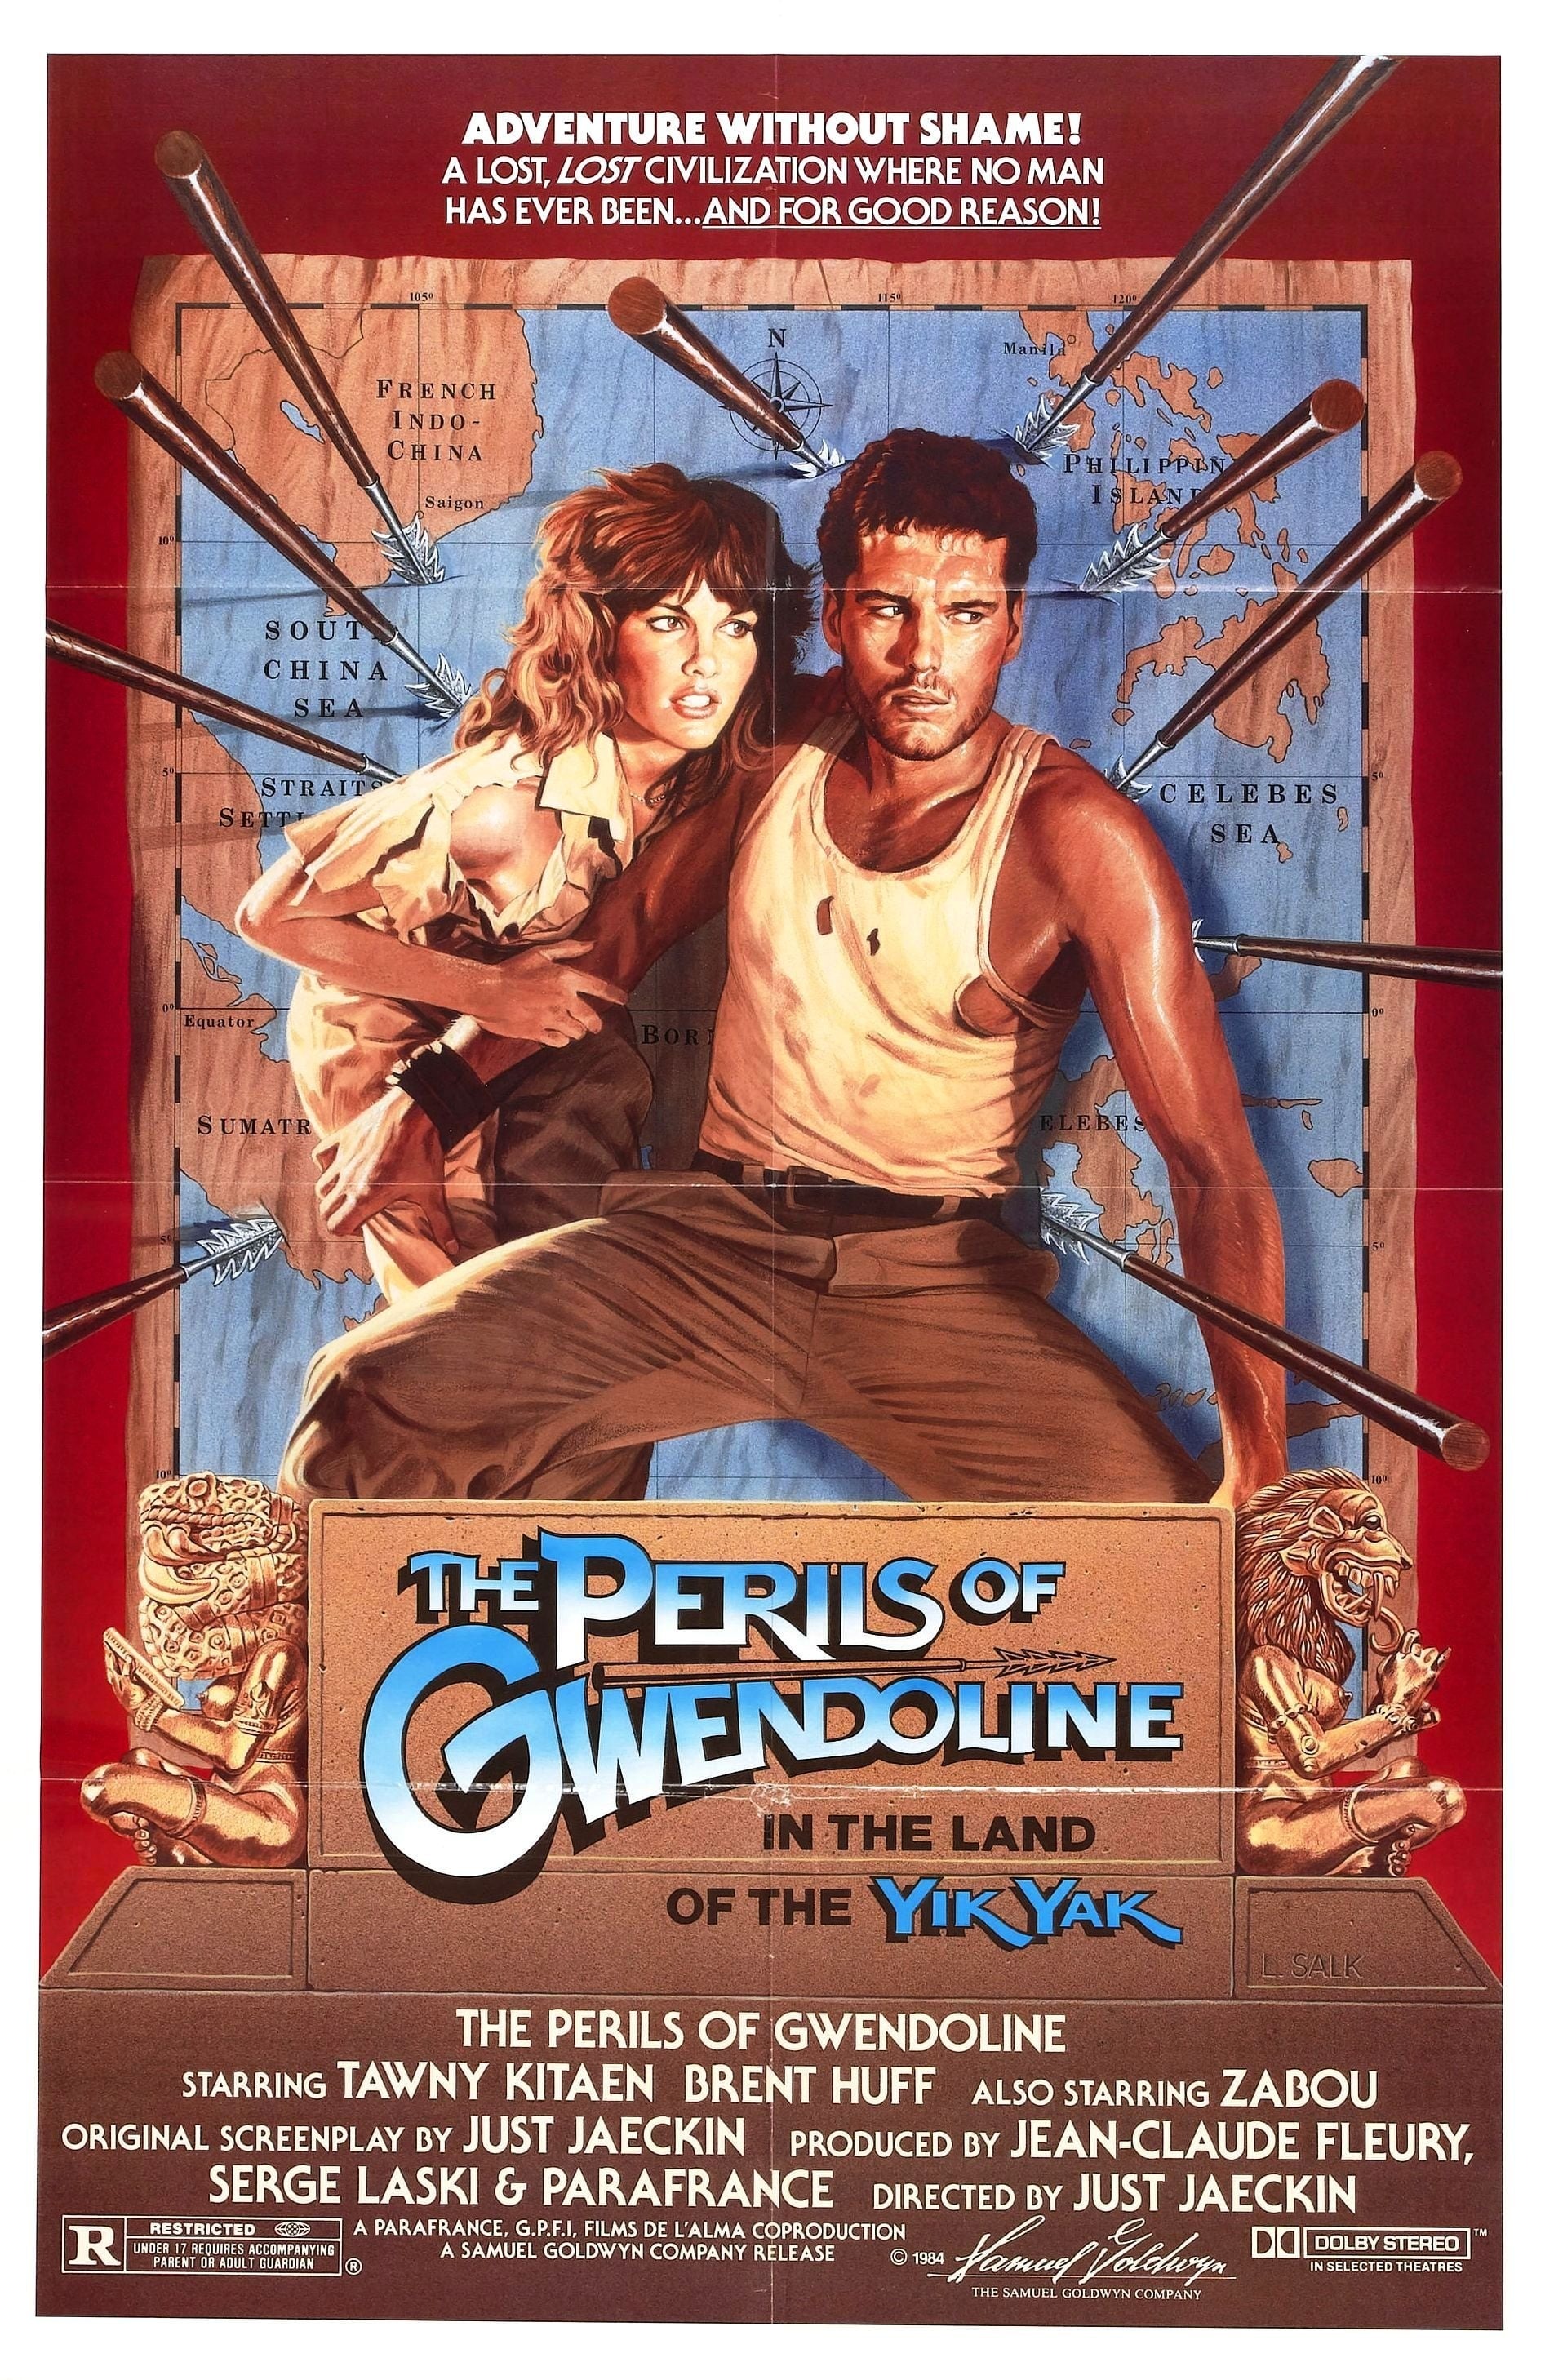 Mega Sized Movie Poster Image for The Perils of Gwendoline in the Land of the Yik Yak 